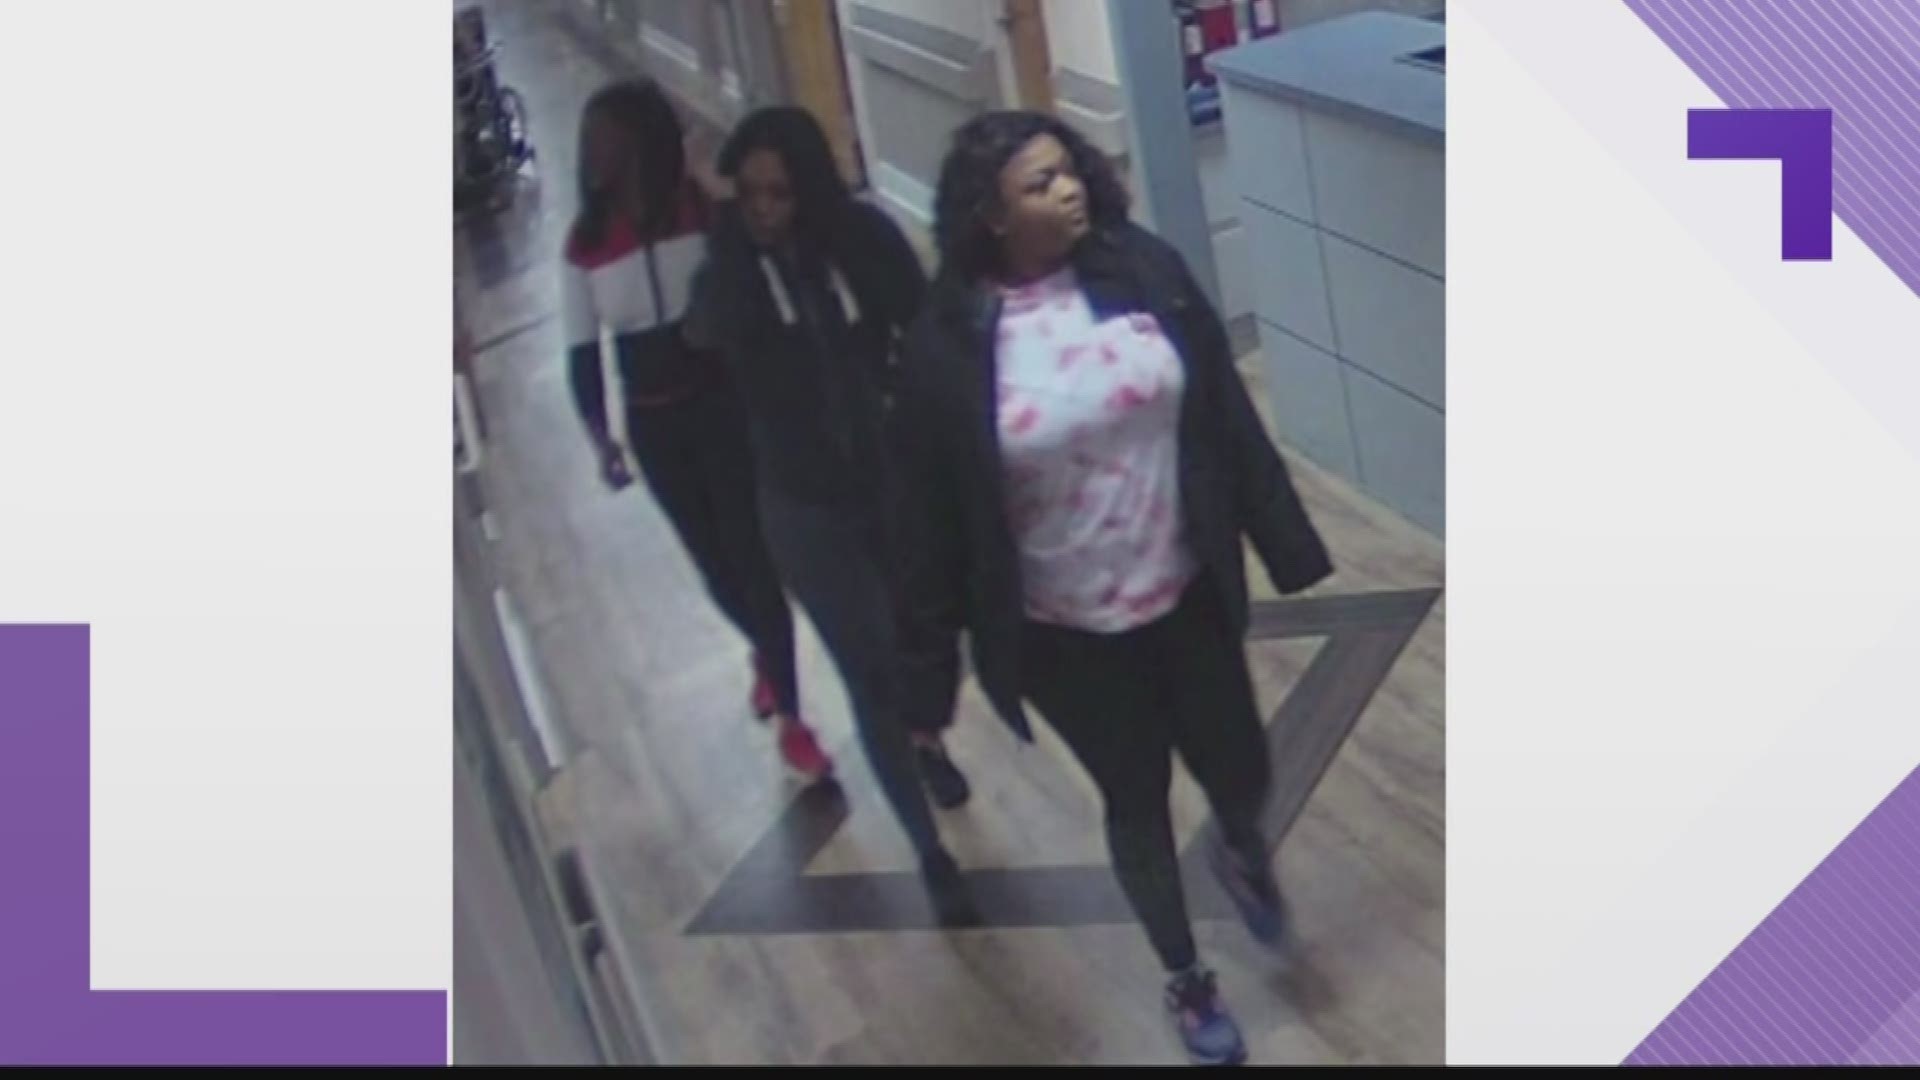 Authorities have released photos and video of three women accused of stealing from a Carroll County nursing home.